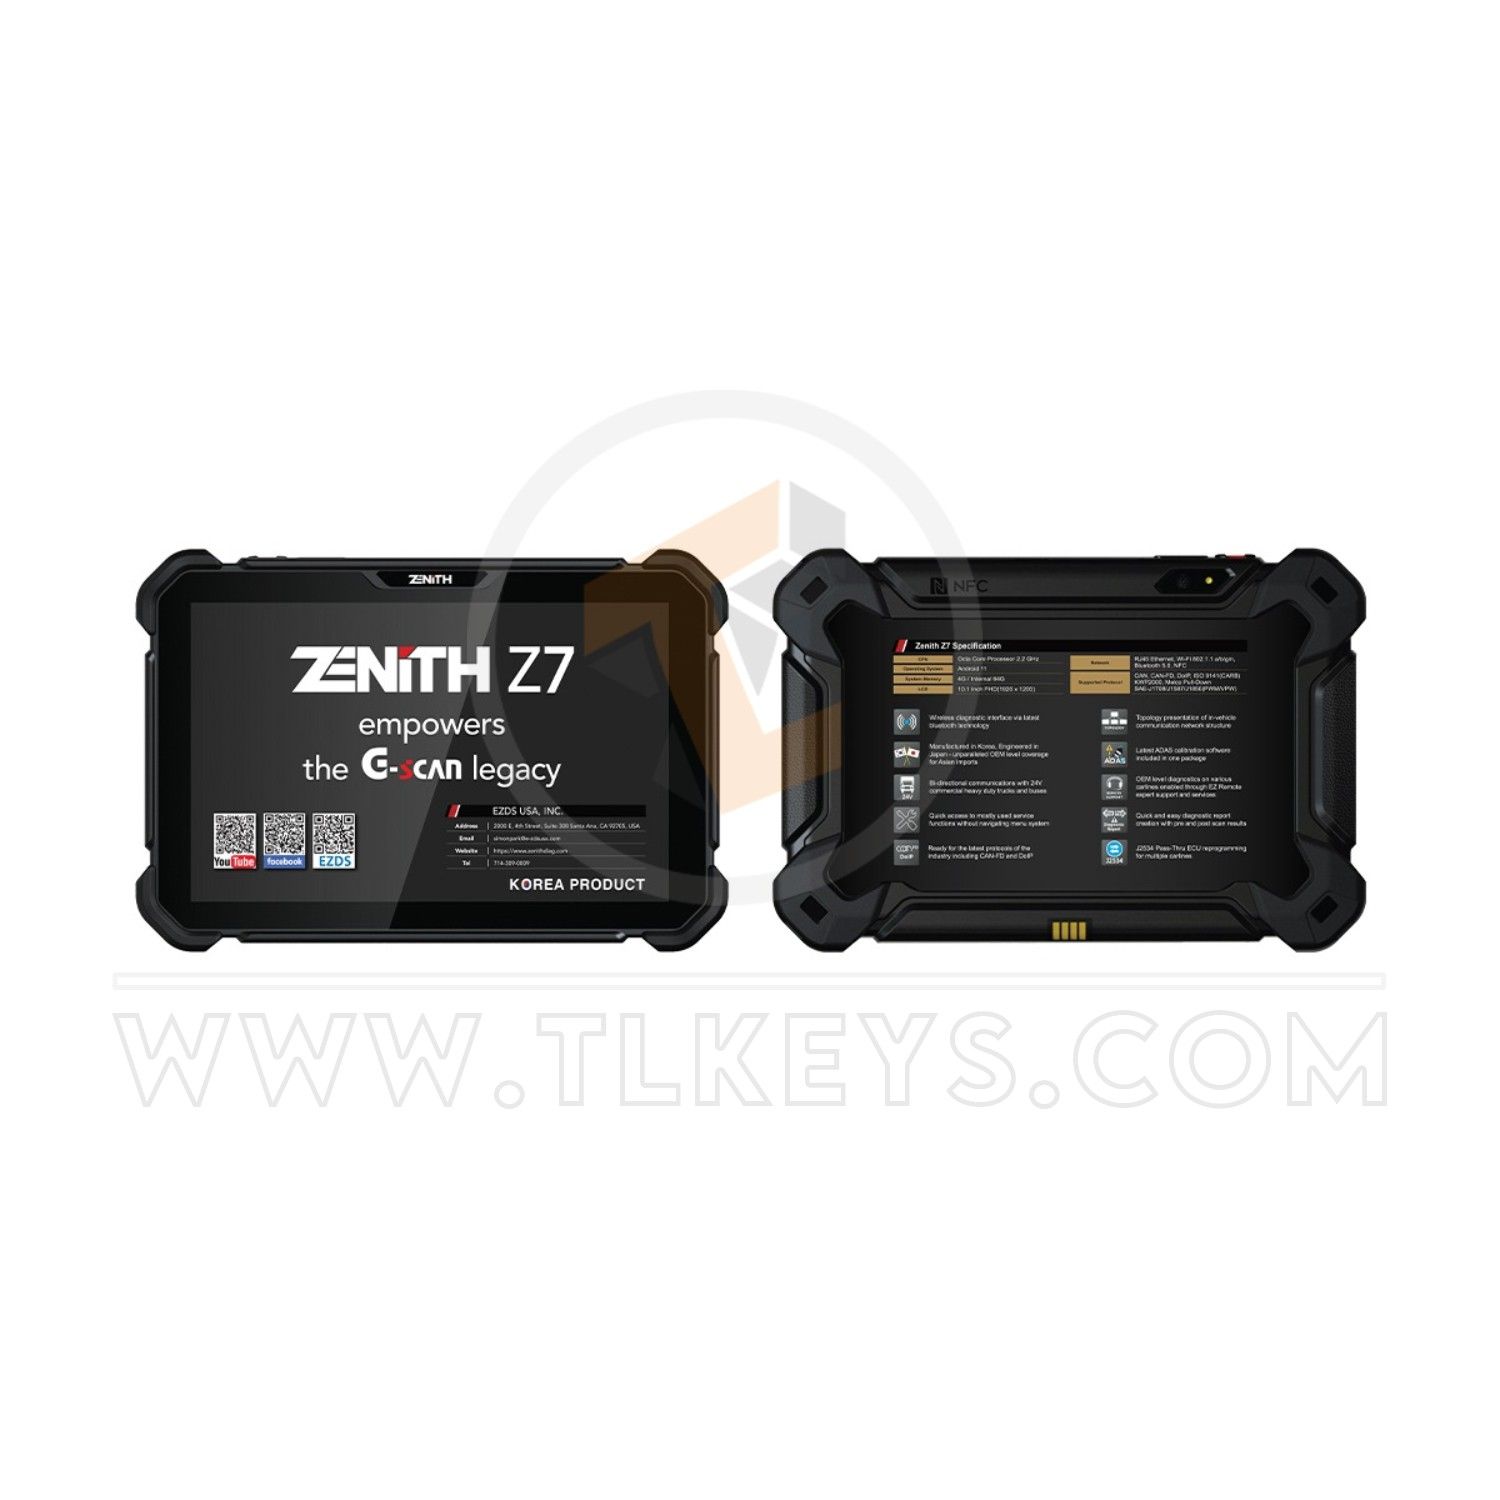 G-scan Zenith Z7 Pro Tablet: Ultimate Performance